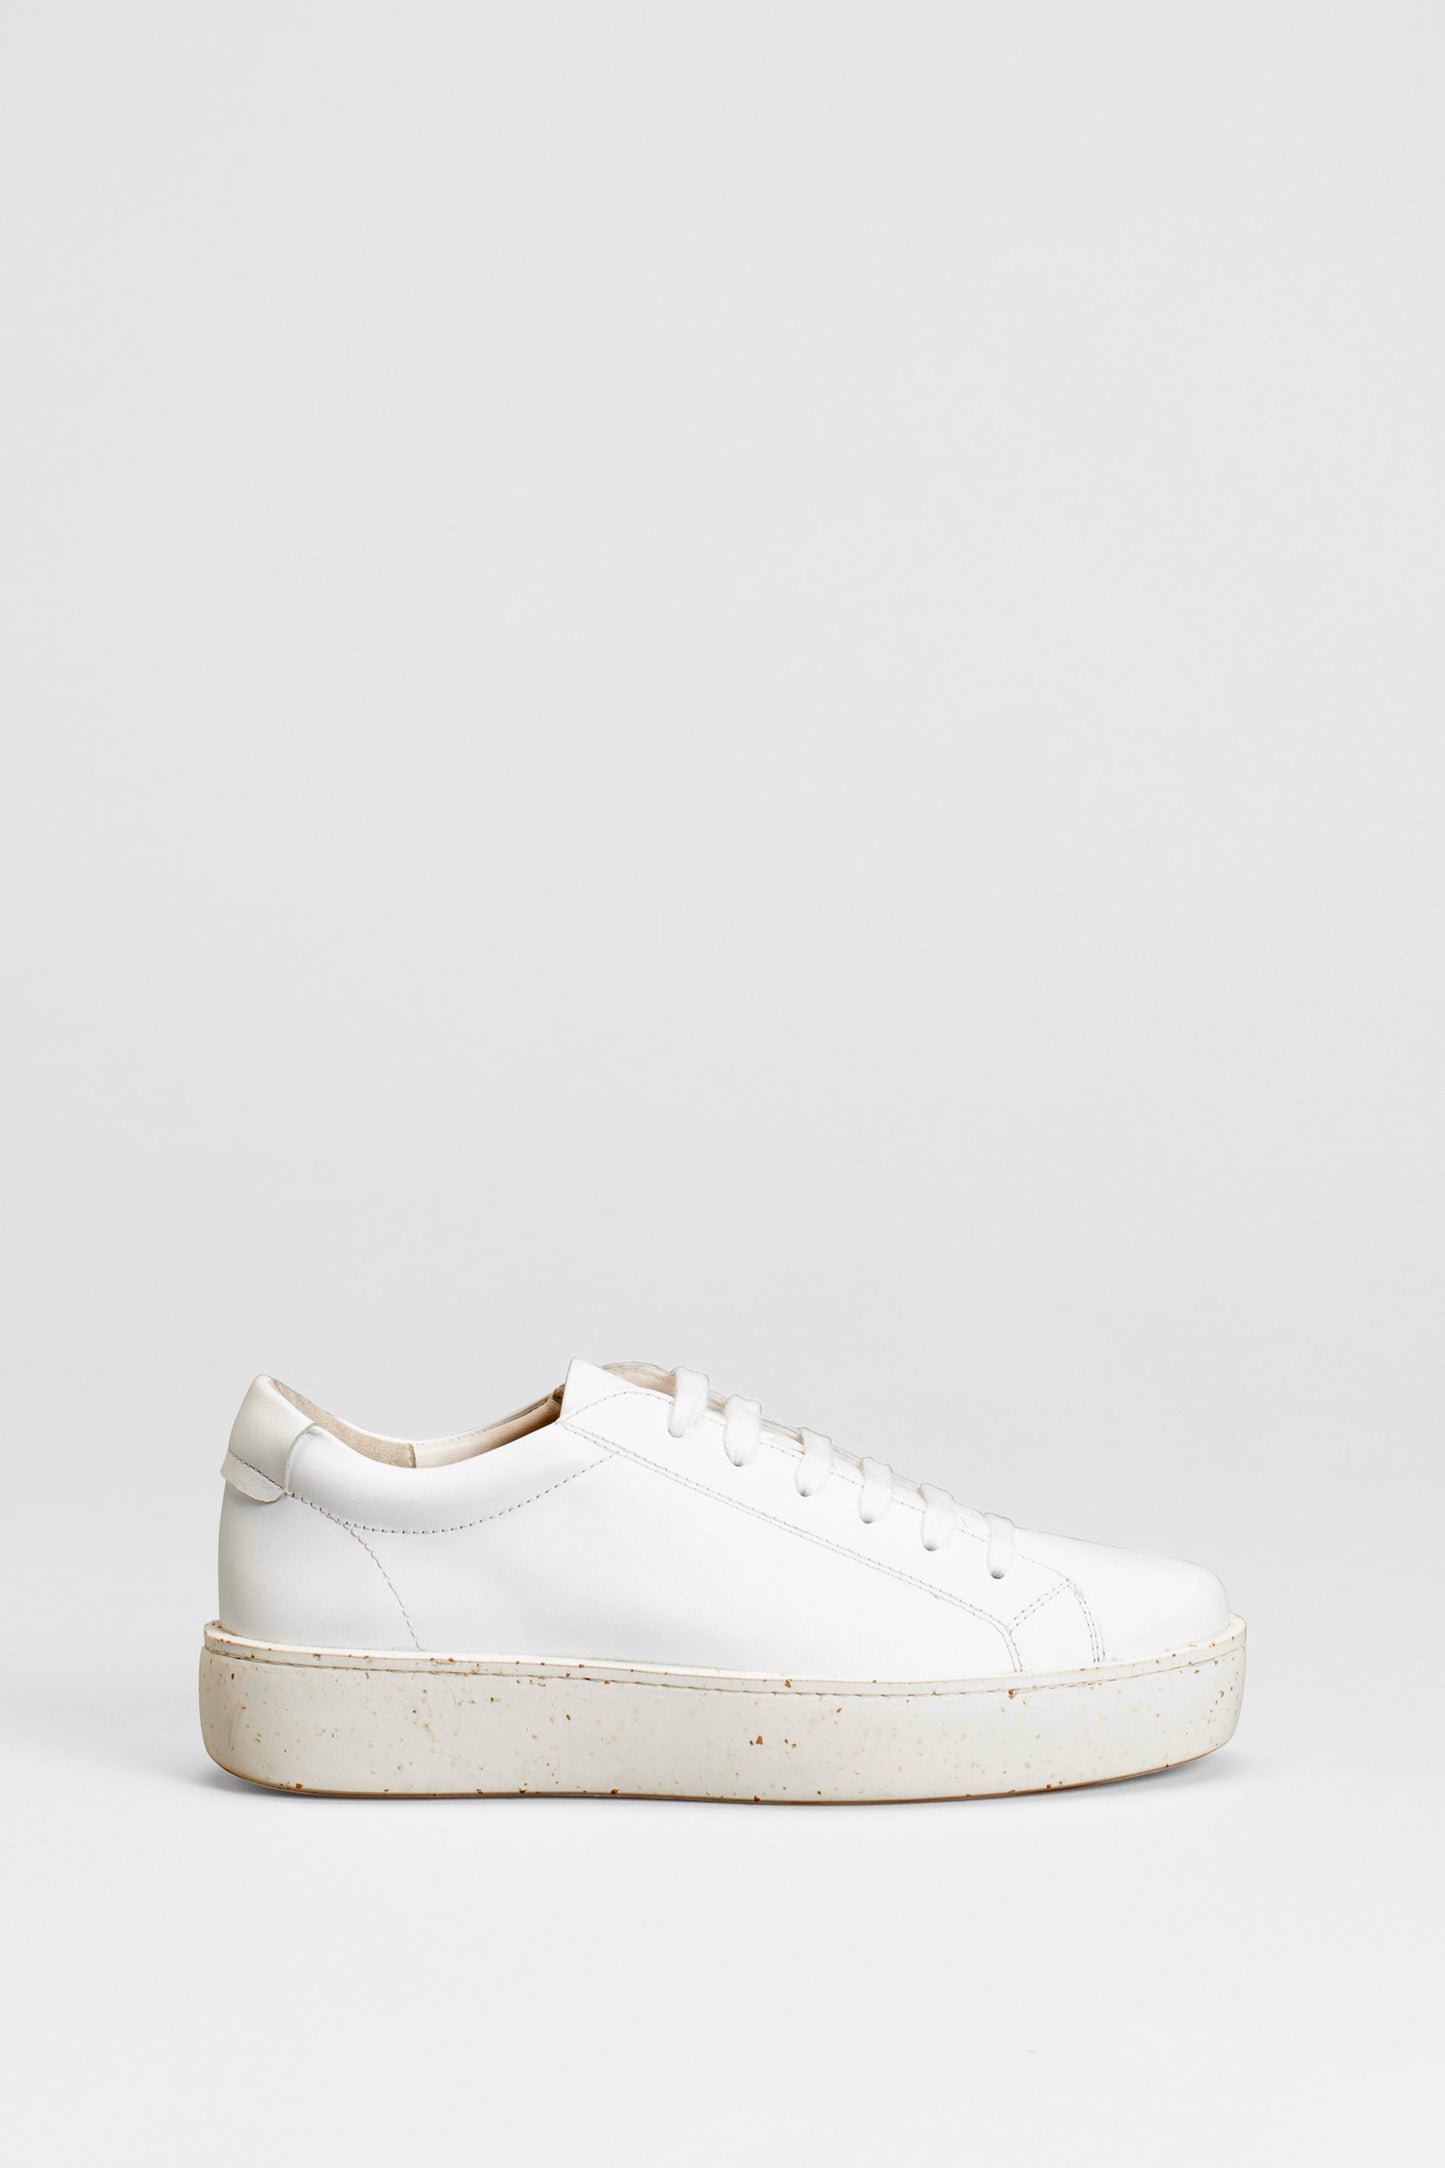 Risby Recycled Sole Sneaker Side WHITE